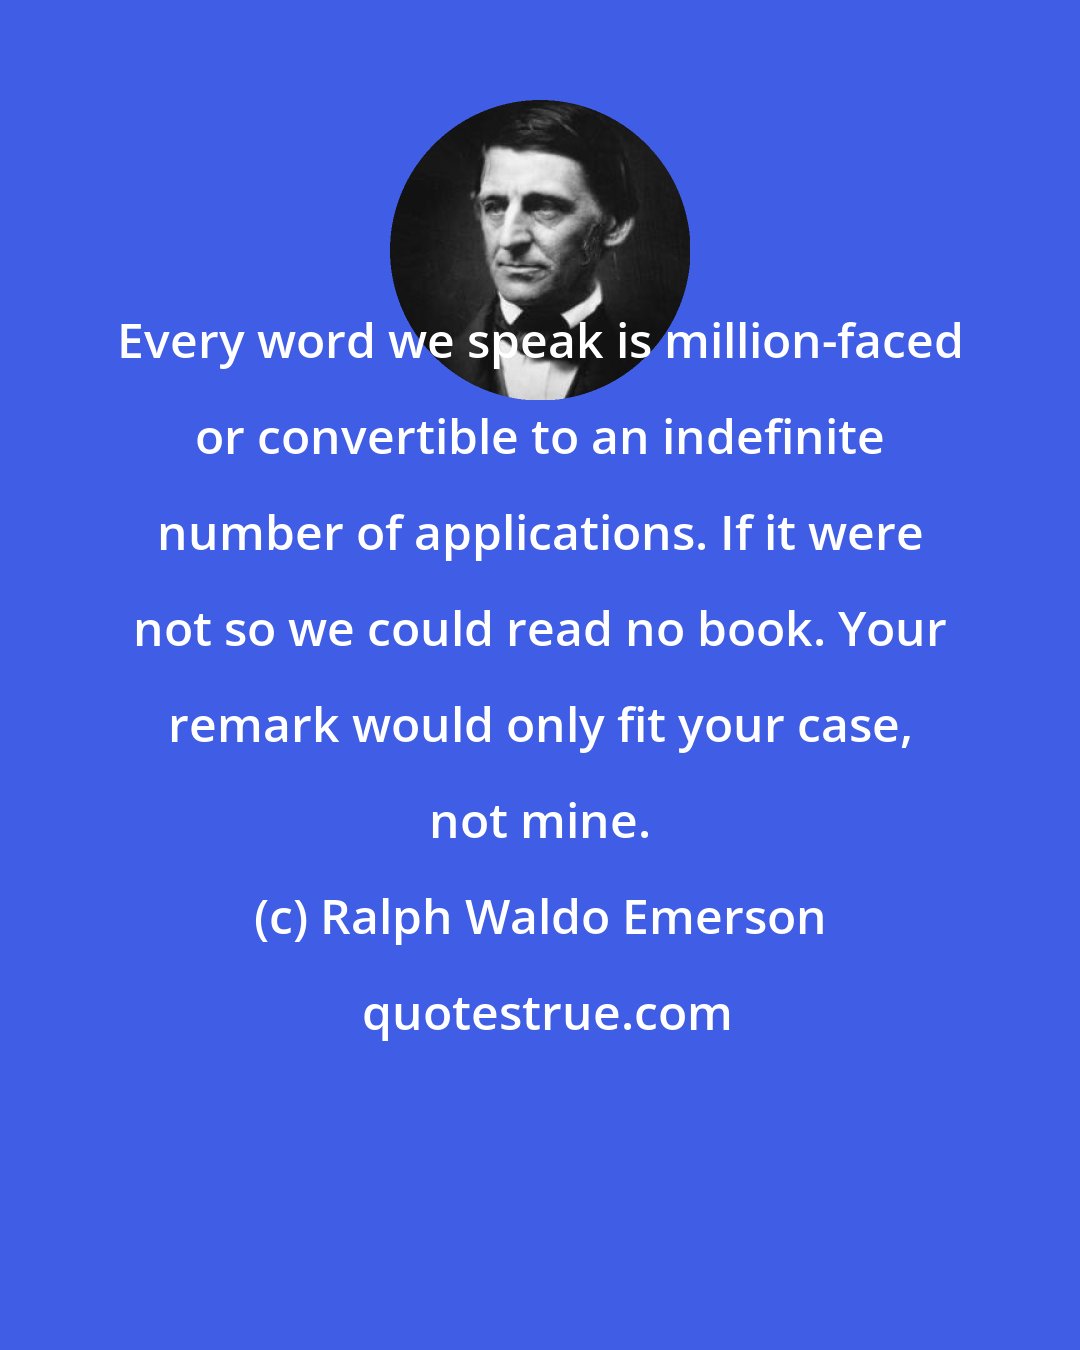 Ralph Waldo Emerson: Every word we speak is million-faced or convertible to an indefinite number of applications. If it were not so we could read no book. Your remark would only fit your case, not mine.